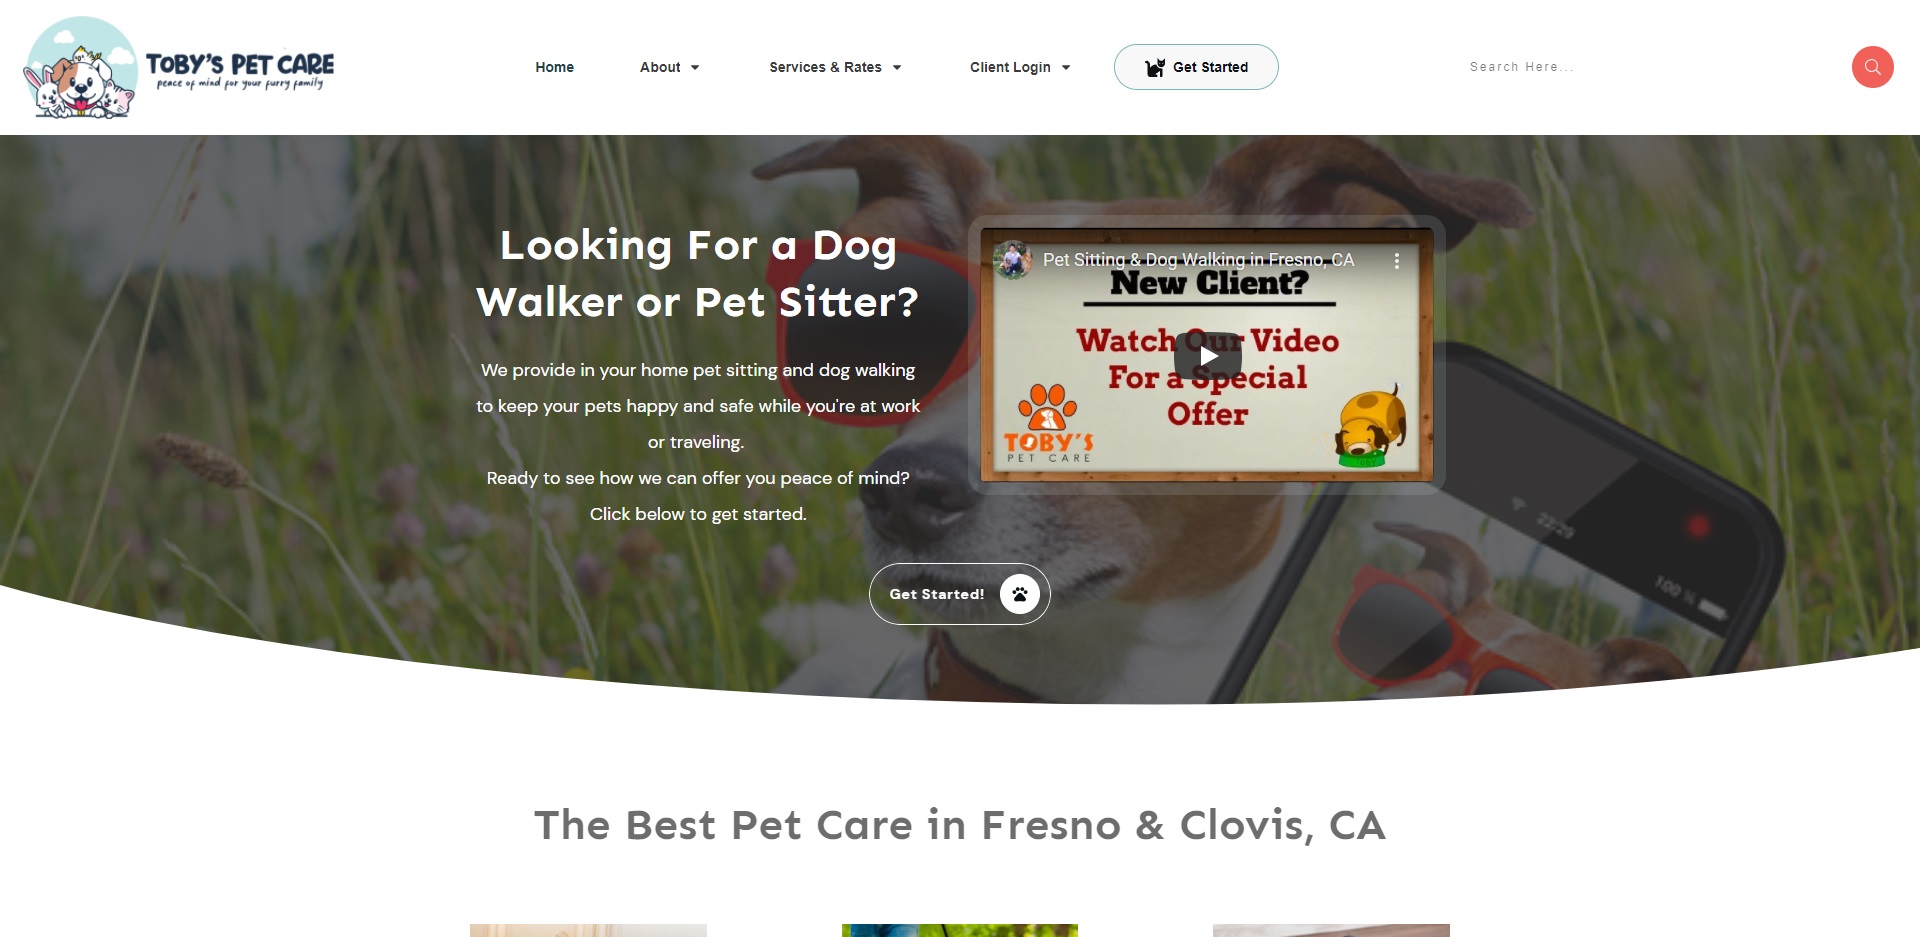 The Best Pet Care Centre in Fresno, CA